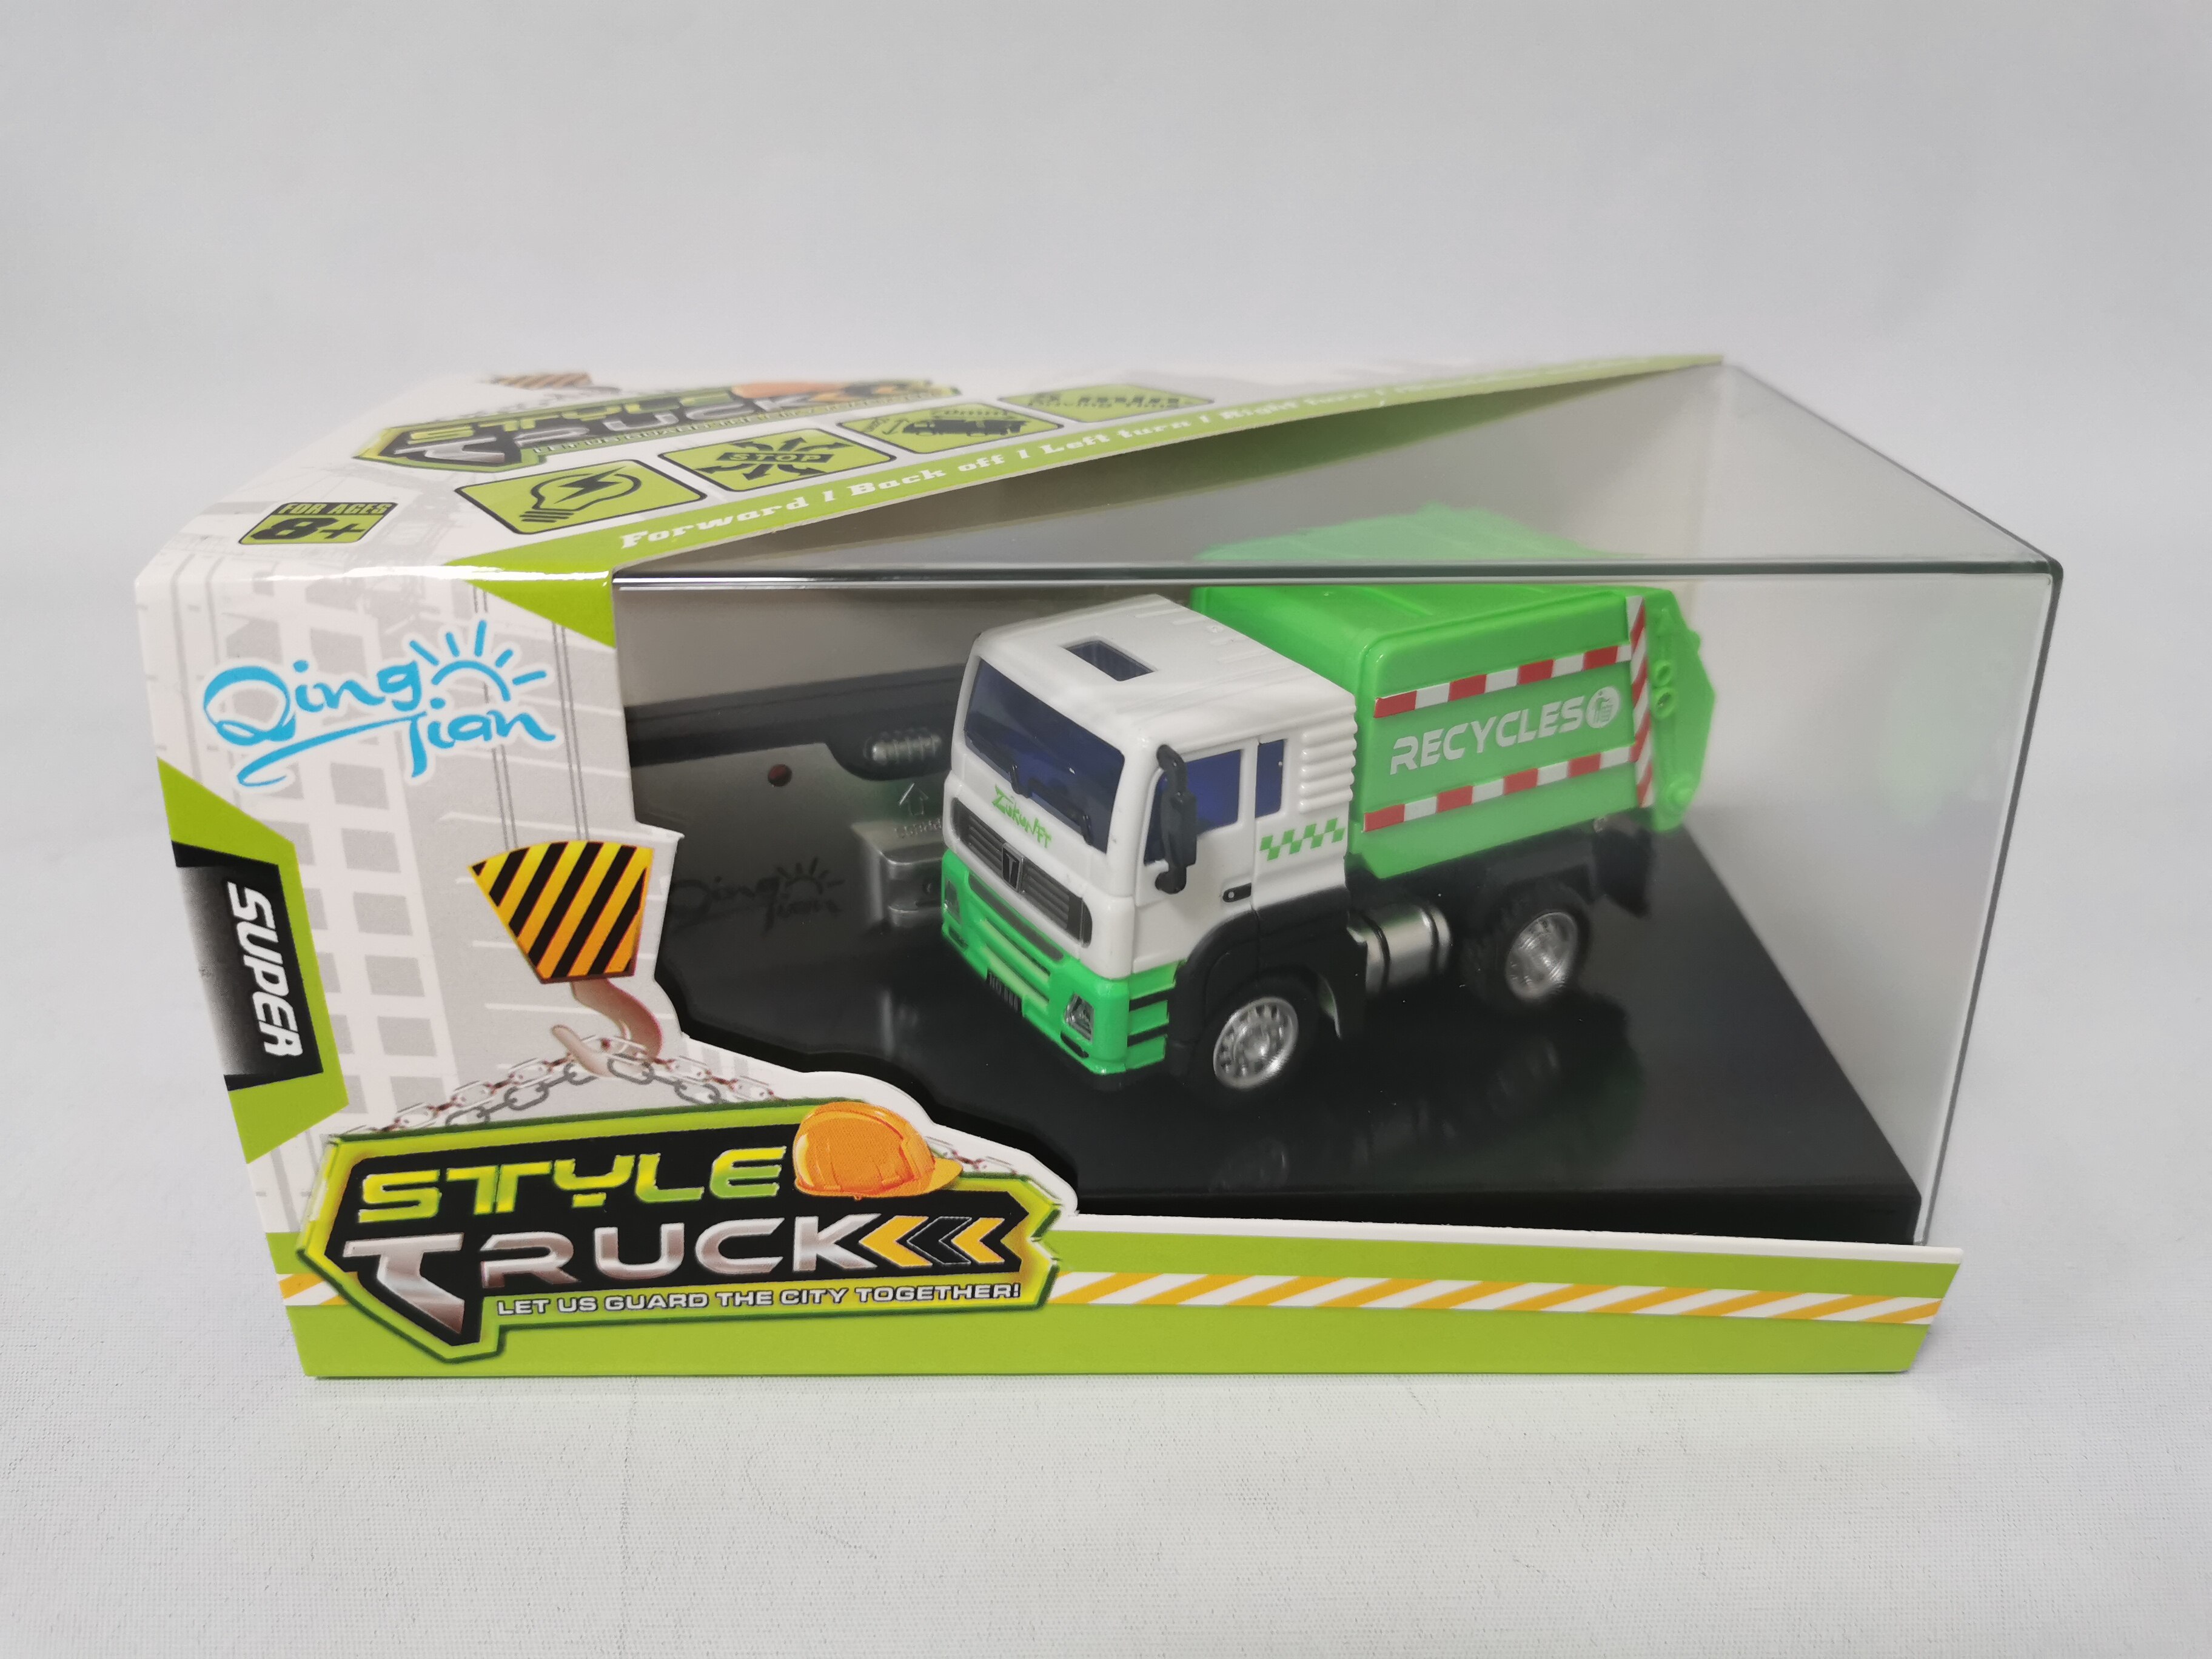 rc toy company, small metal toy trucks, diecast metal car toys